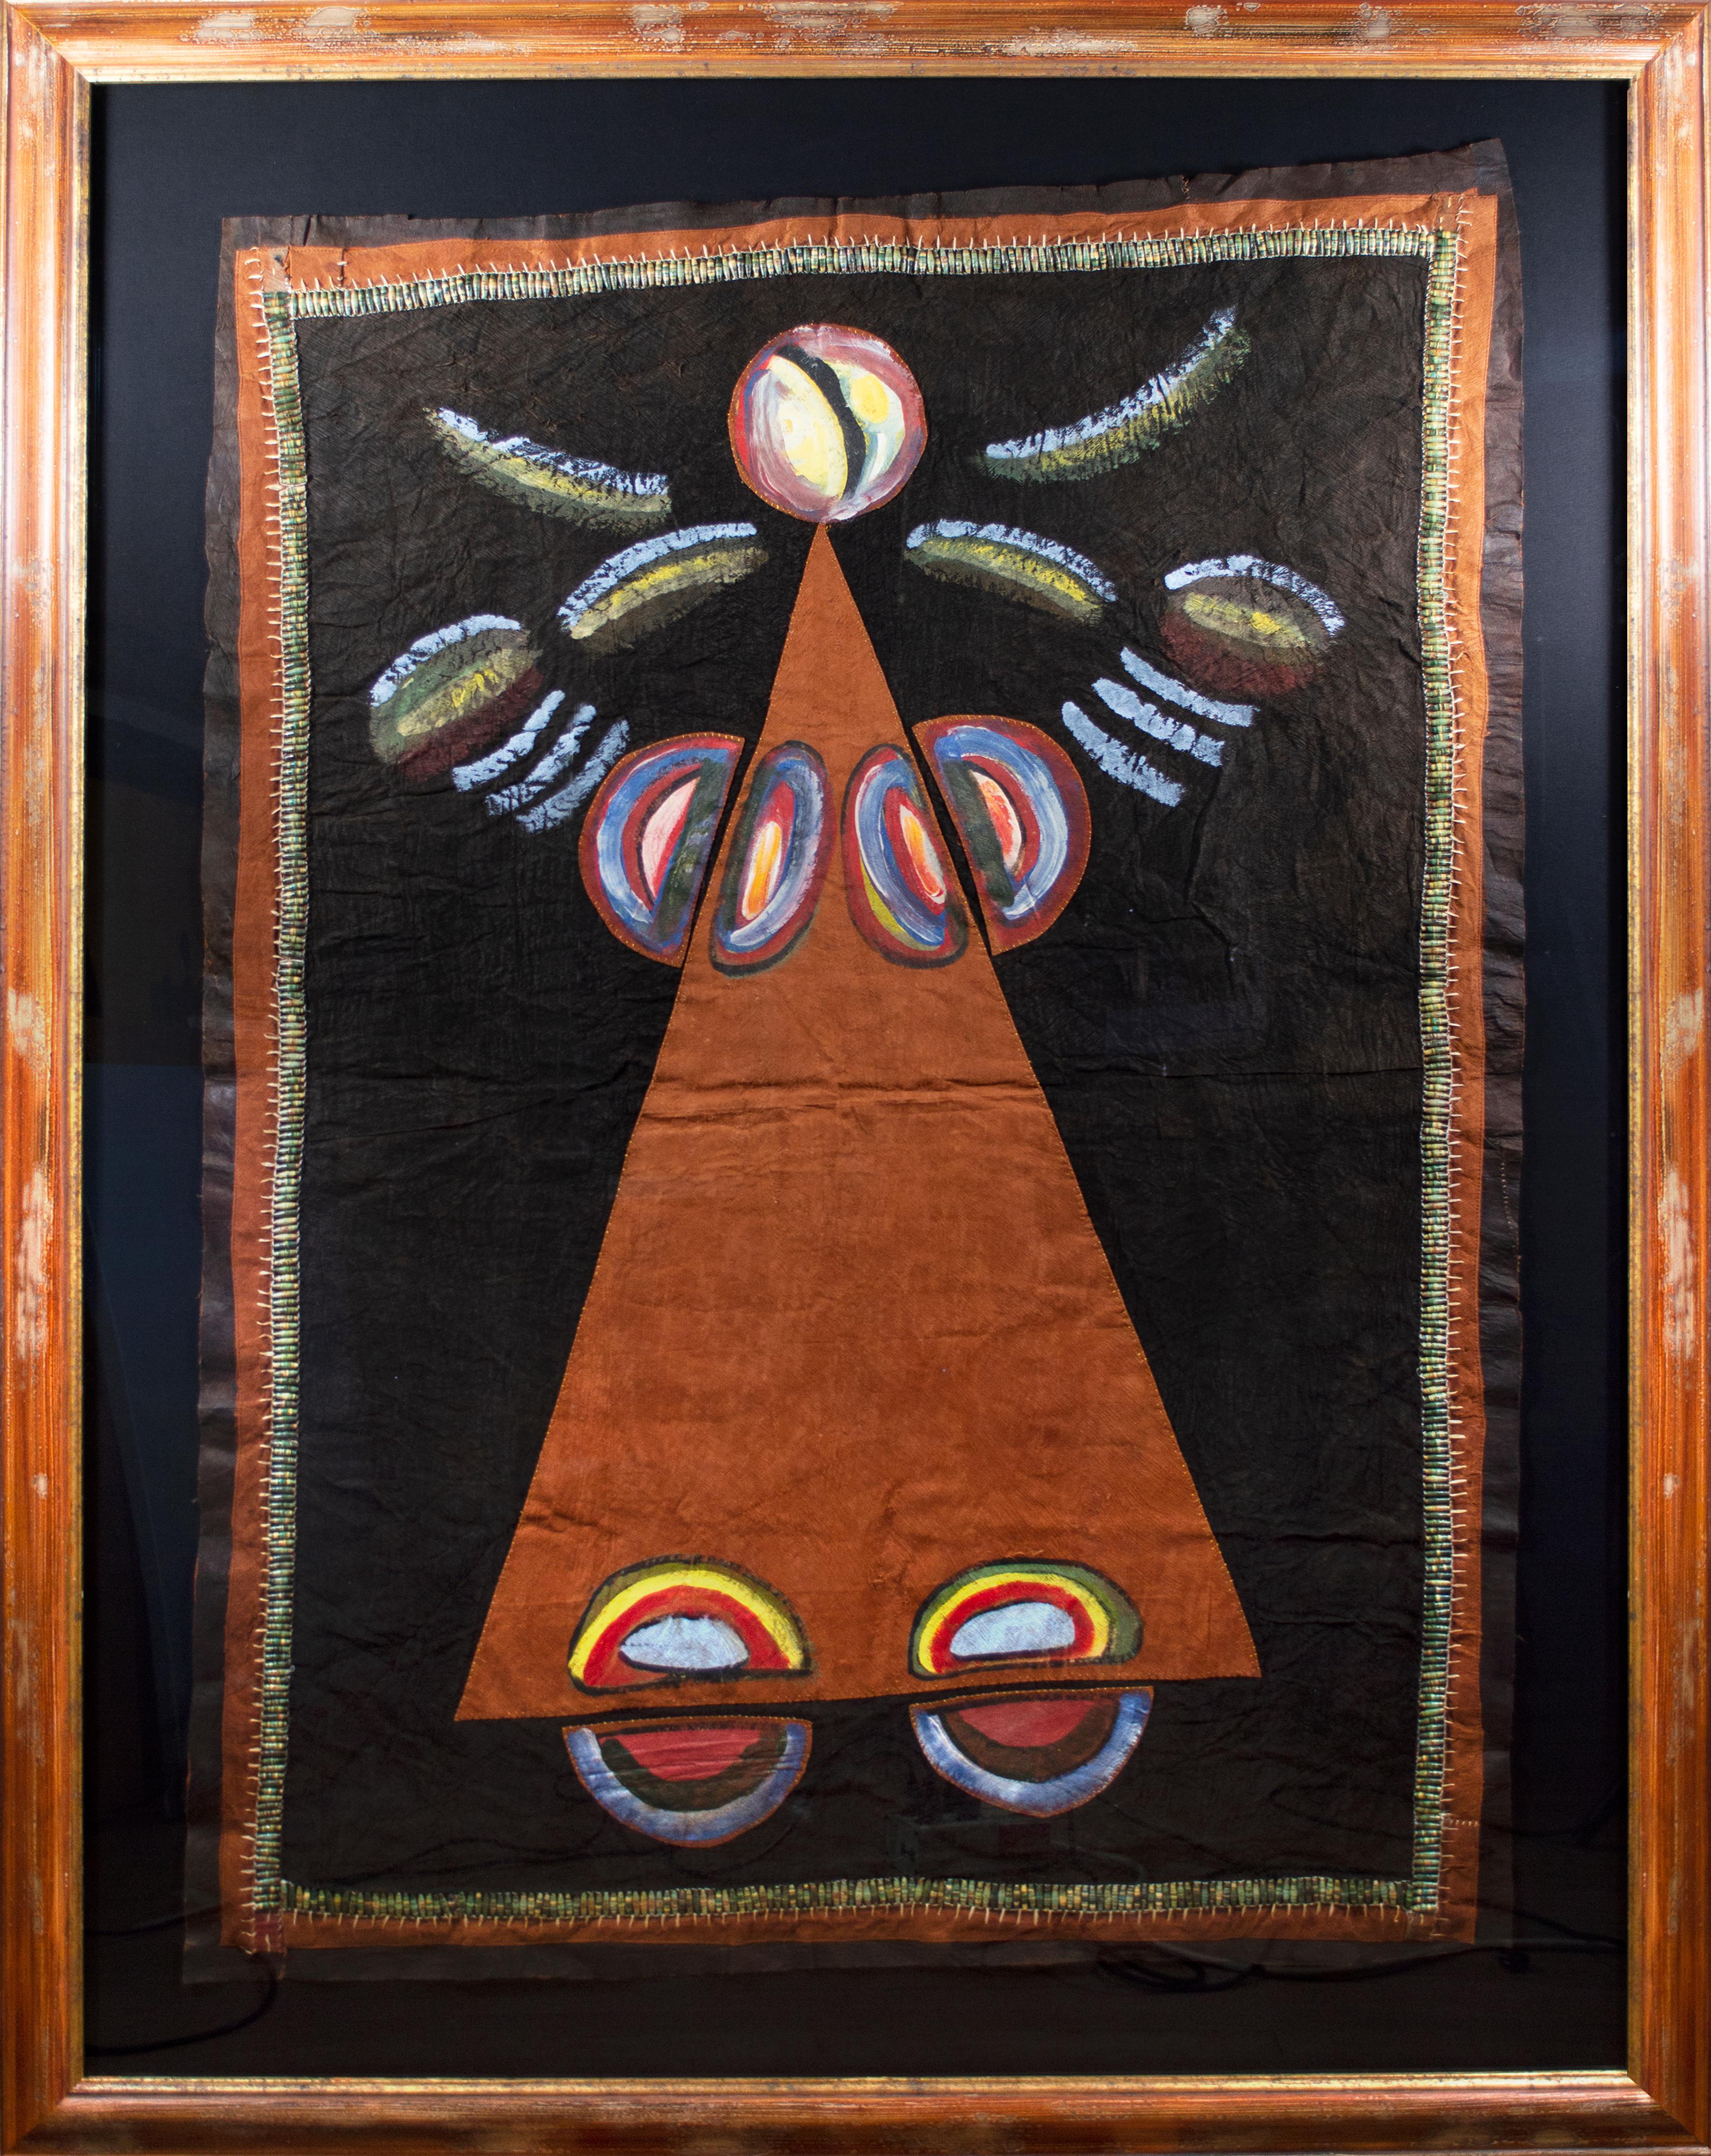 "Back Into the Future" is a fine example of the mid-career work of Ugandan artist Sanaa Gateja. It comes from a period in his work in the early 2000s where he was working primarily in geometric forms on a barkcloth support. The artist employs